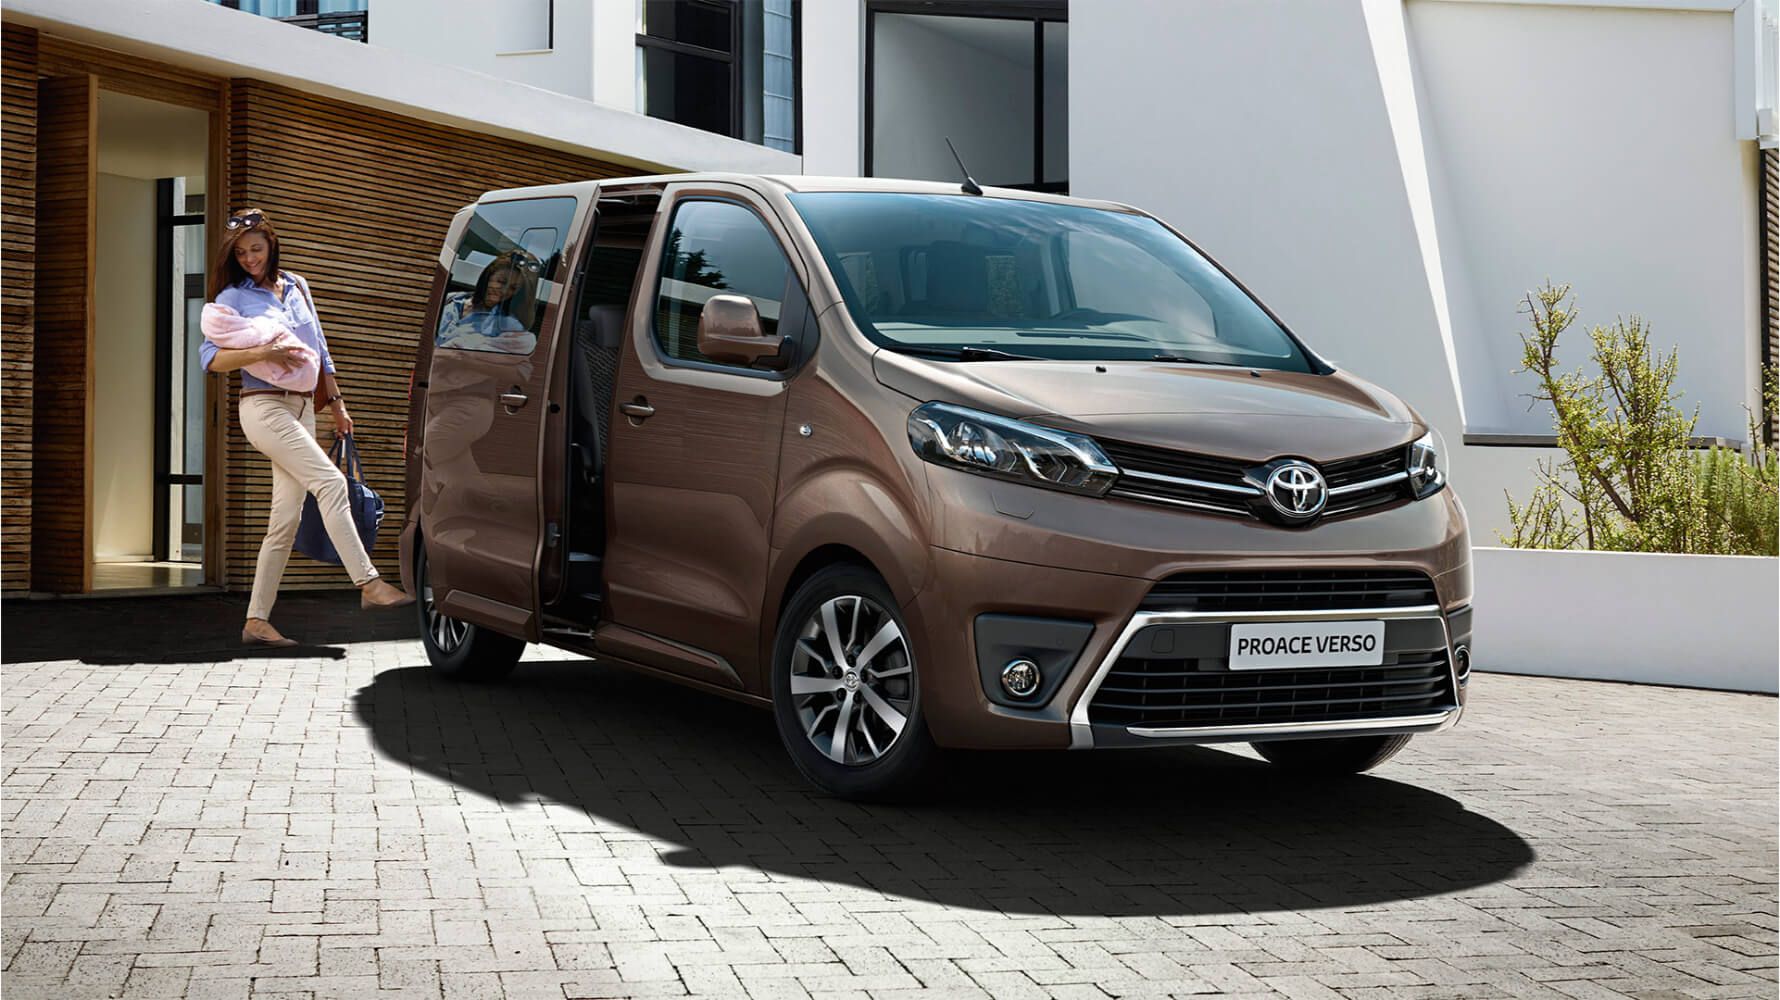 toyota_proace_verso_2019_gallery_003_full_tcm_3046_1703763